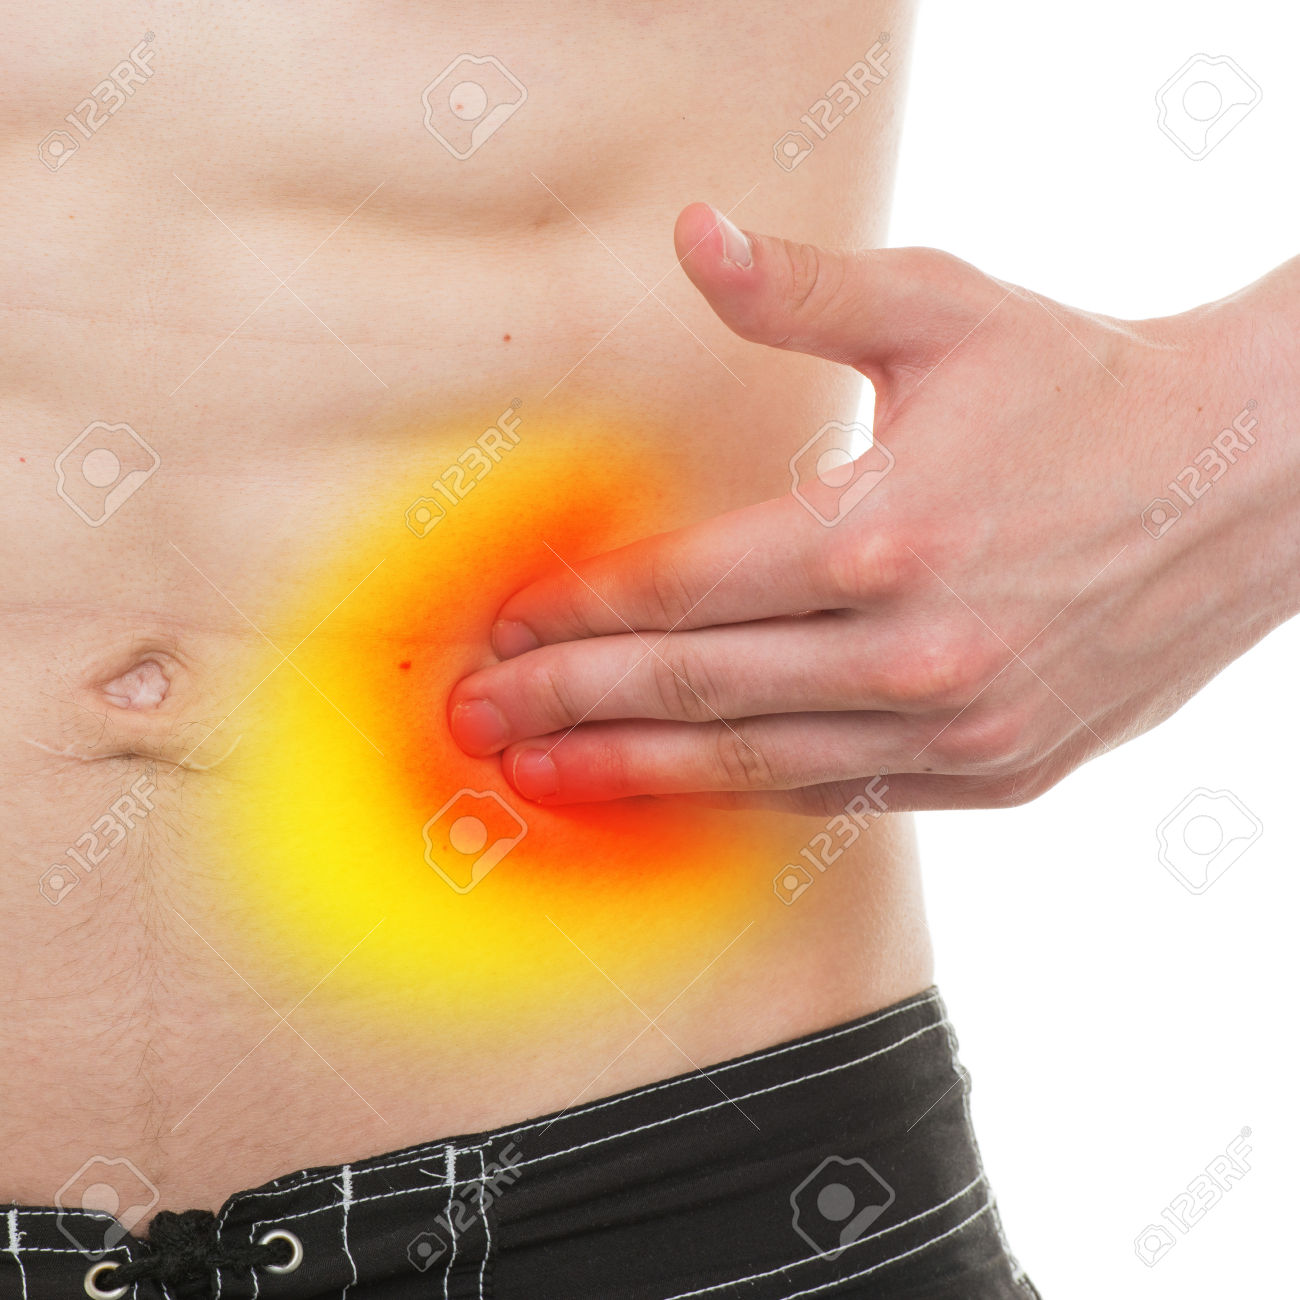 50395284-Abdominal-Pain-Male-Anatomy-Left-Side-Pain-isolated-on-white--Stock-Photo